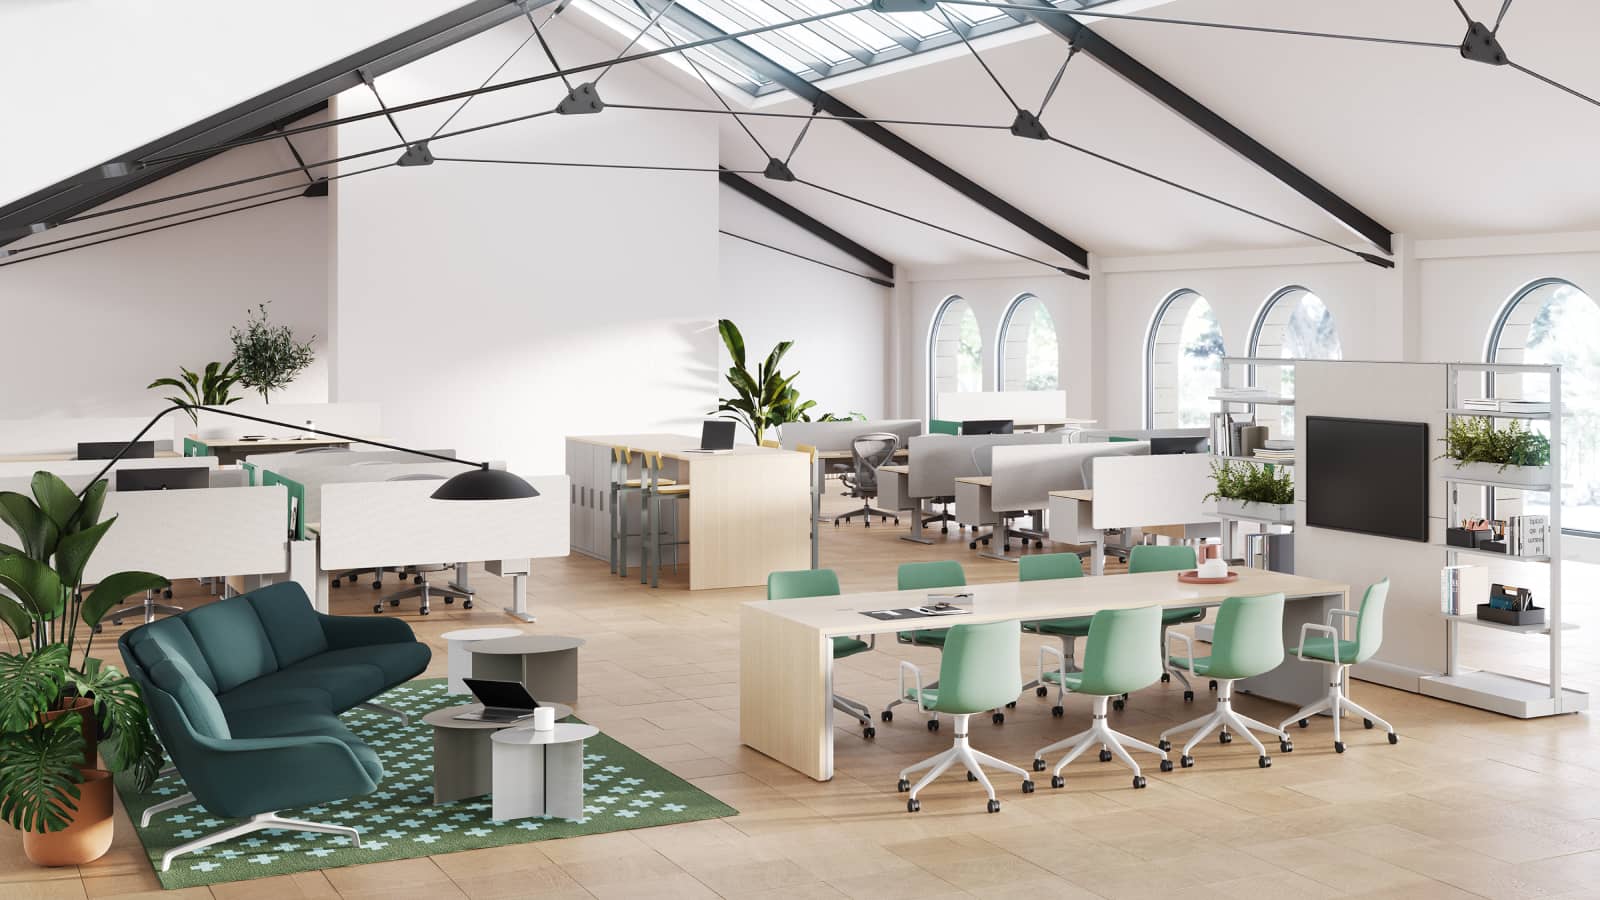 A workplace neighborhood designed for a team that balances independent work with interdependent decision-making, featuring comfortable furnishings that promote a collegial atmosphere.